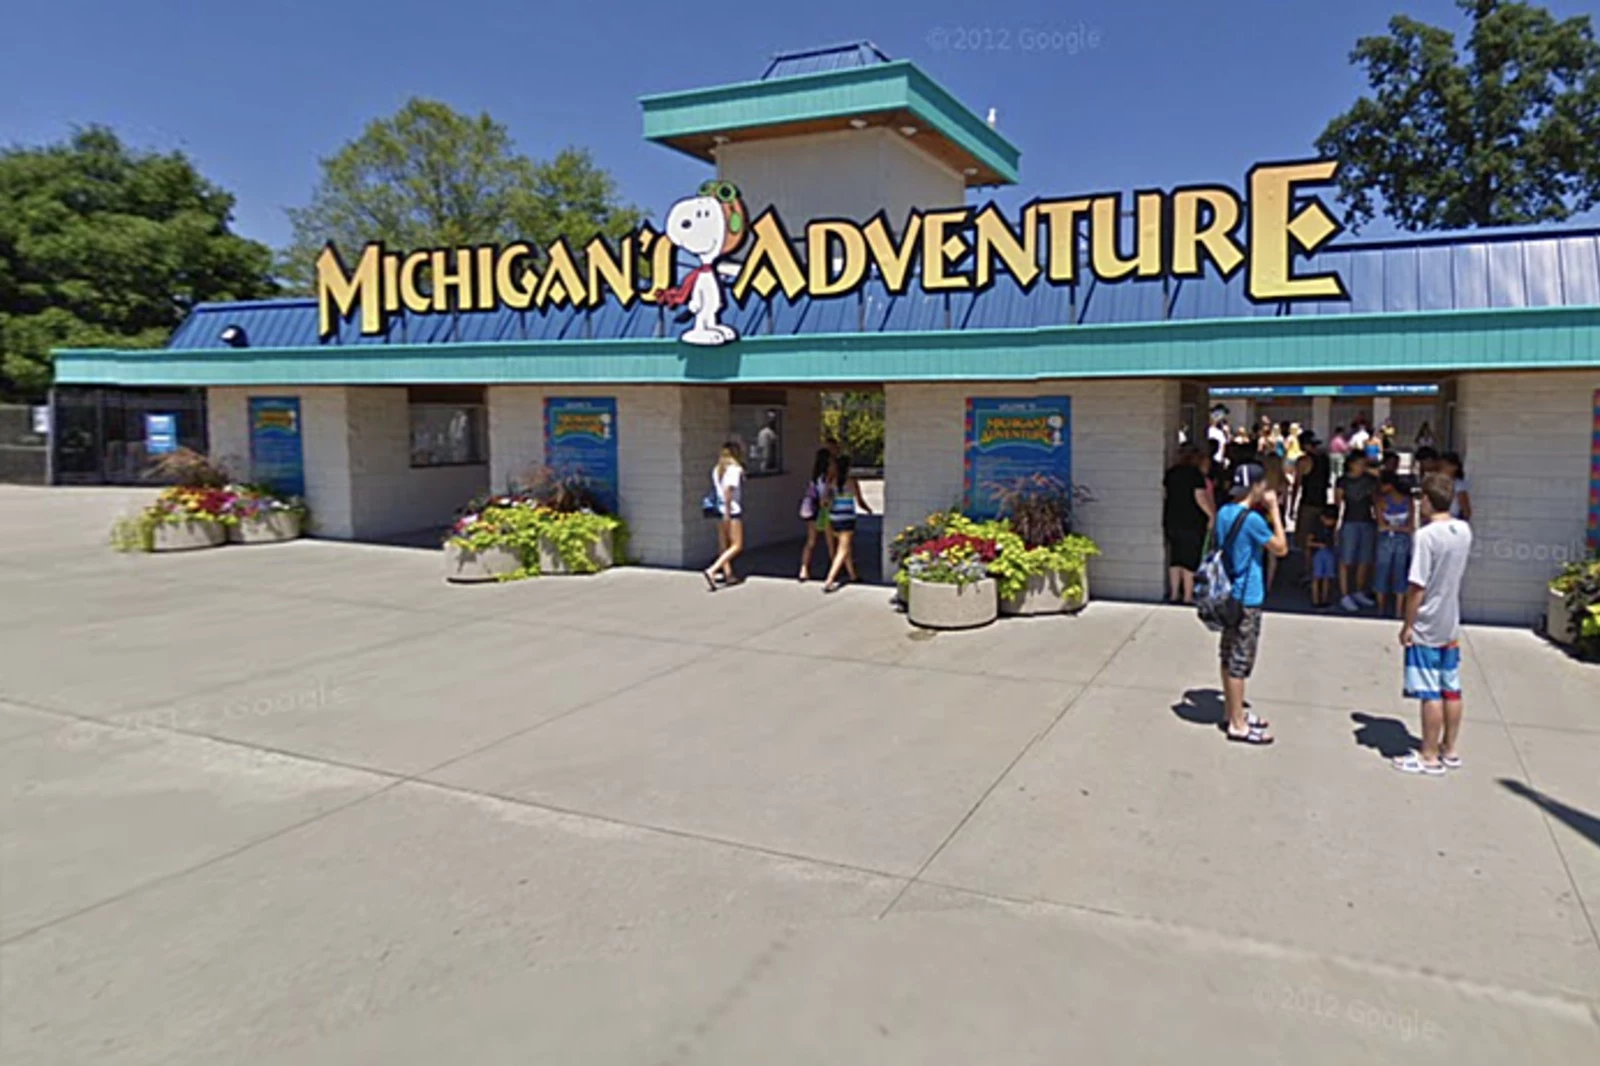 WildWater Adventure at Michigan's Adventure Opens This Saturday